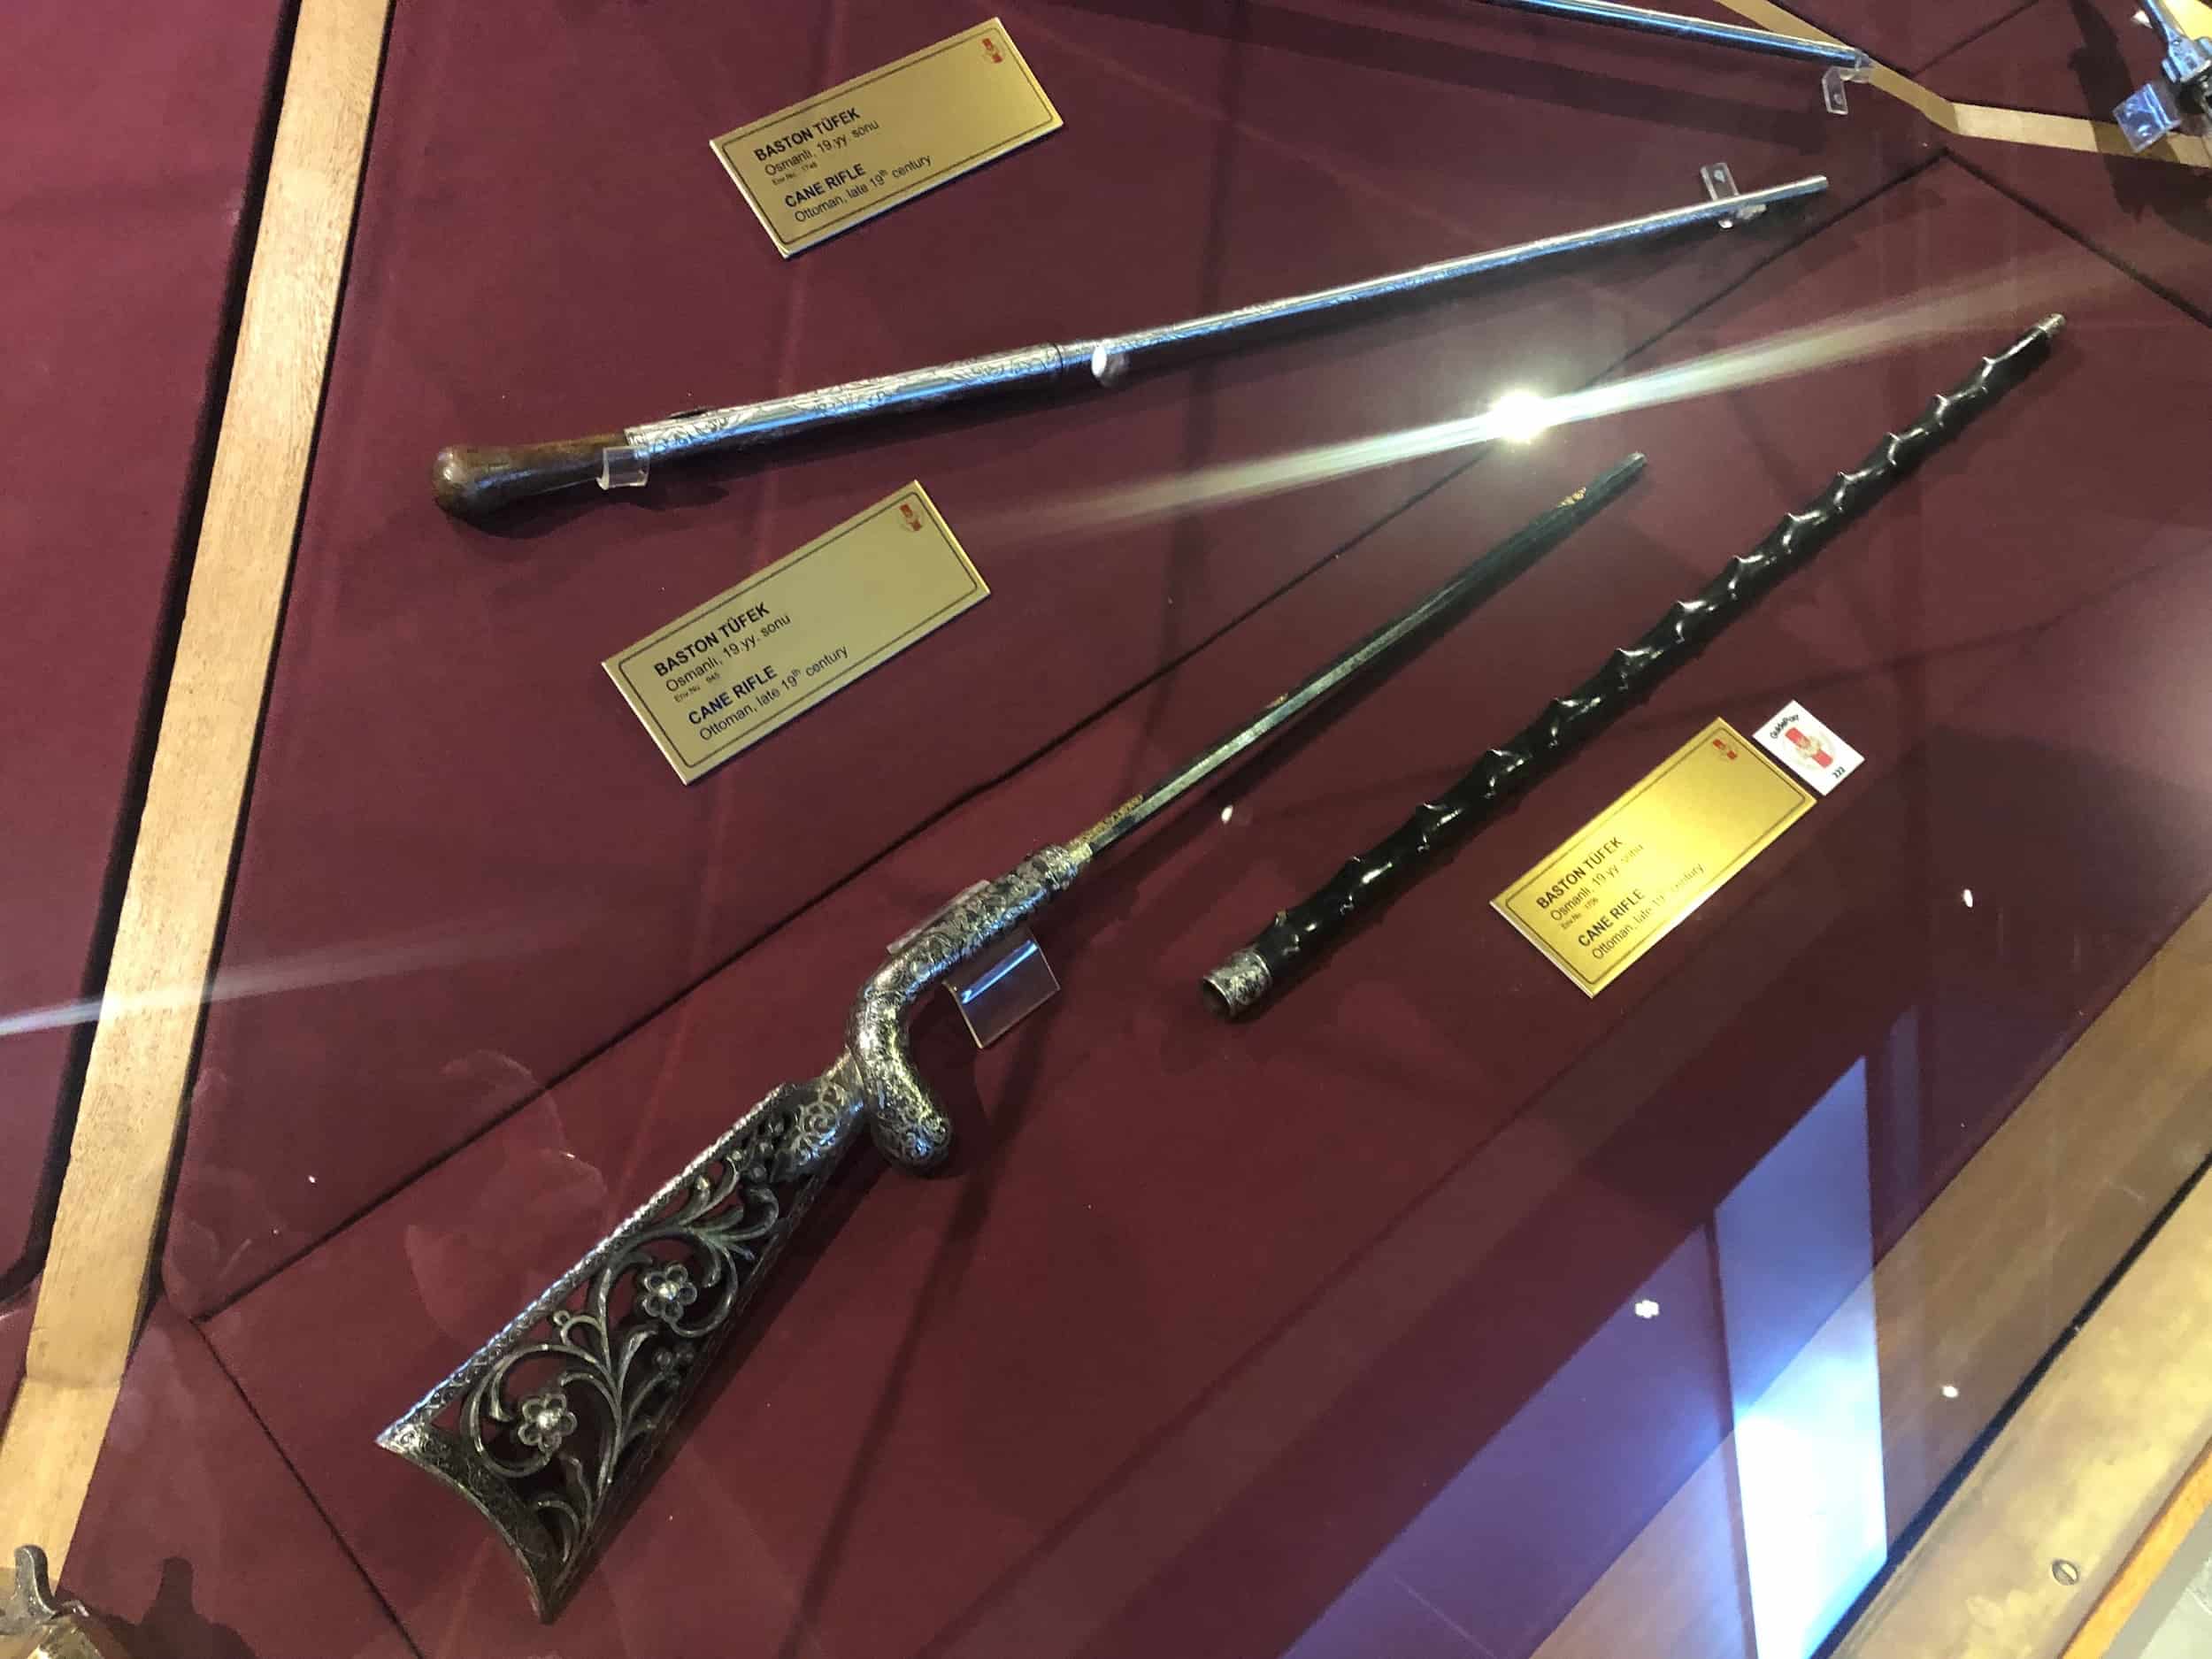 Ottoman cane rifles (19th century) in Firearms Hall 2 at the Harbiye Military Museum in Istanbul, Turkey